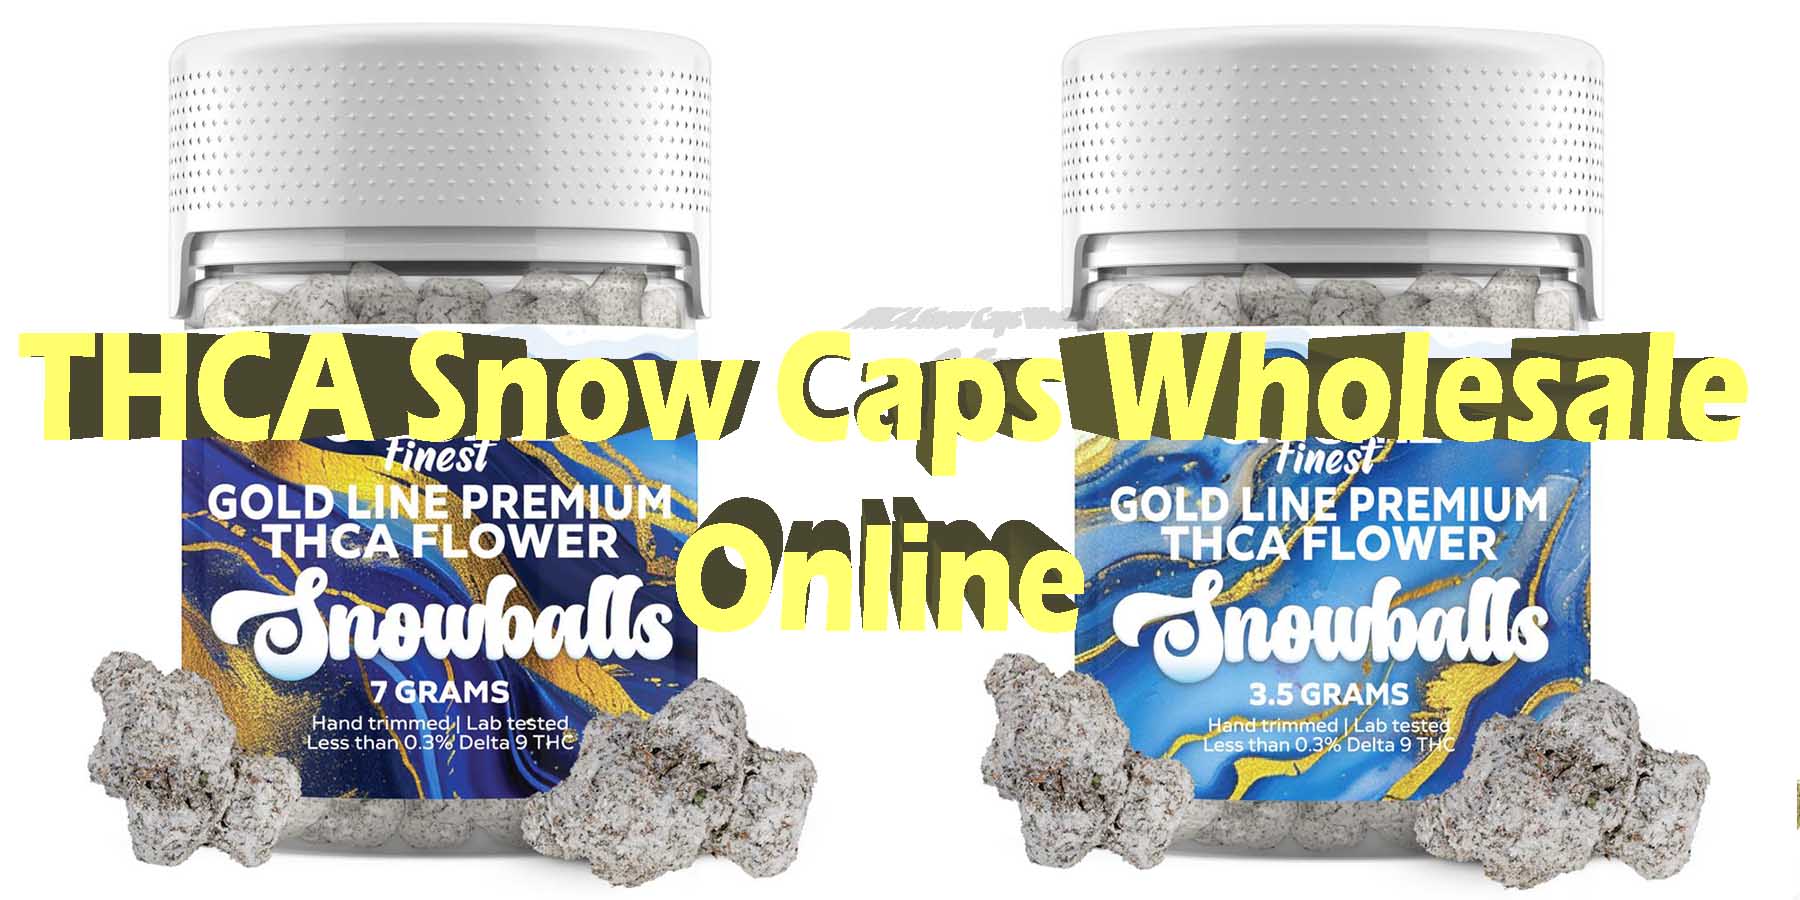 THCA Snow Caps Wholesale Online Coupon Discount For Smoking Best High Smoke THCA THC Cannabinoids Shop Online Bloomz.